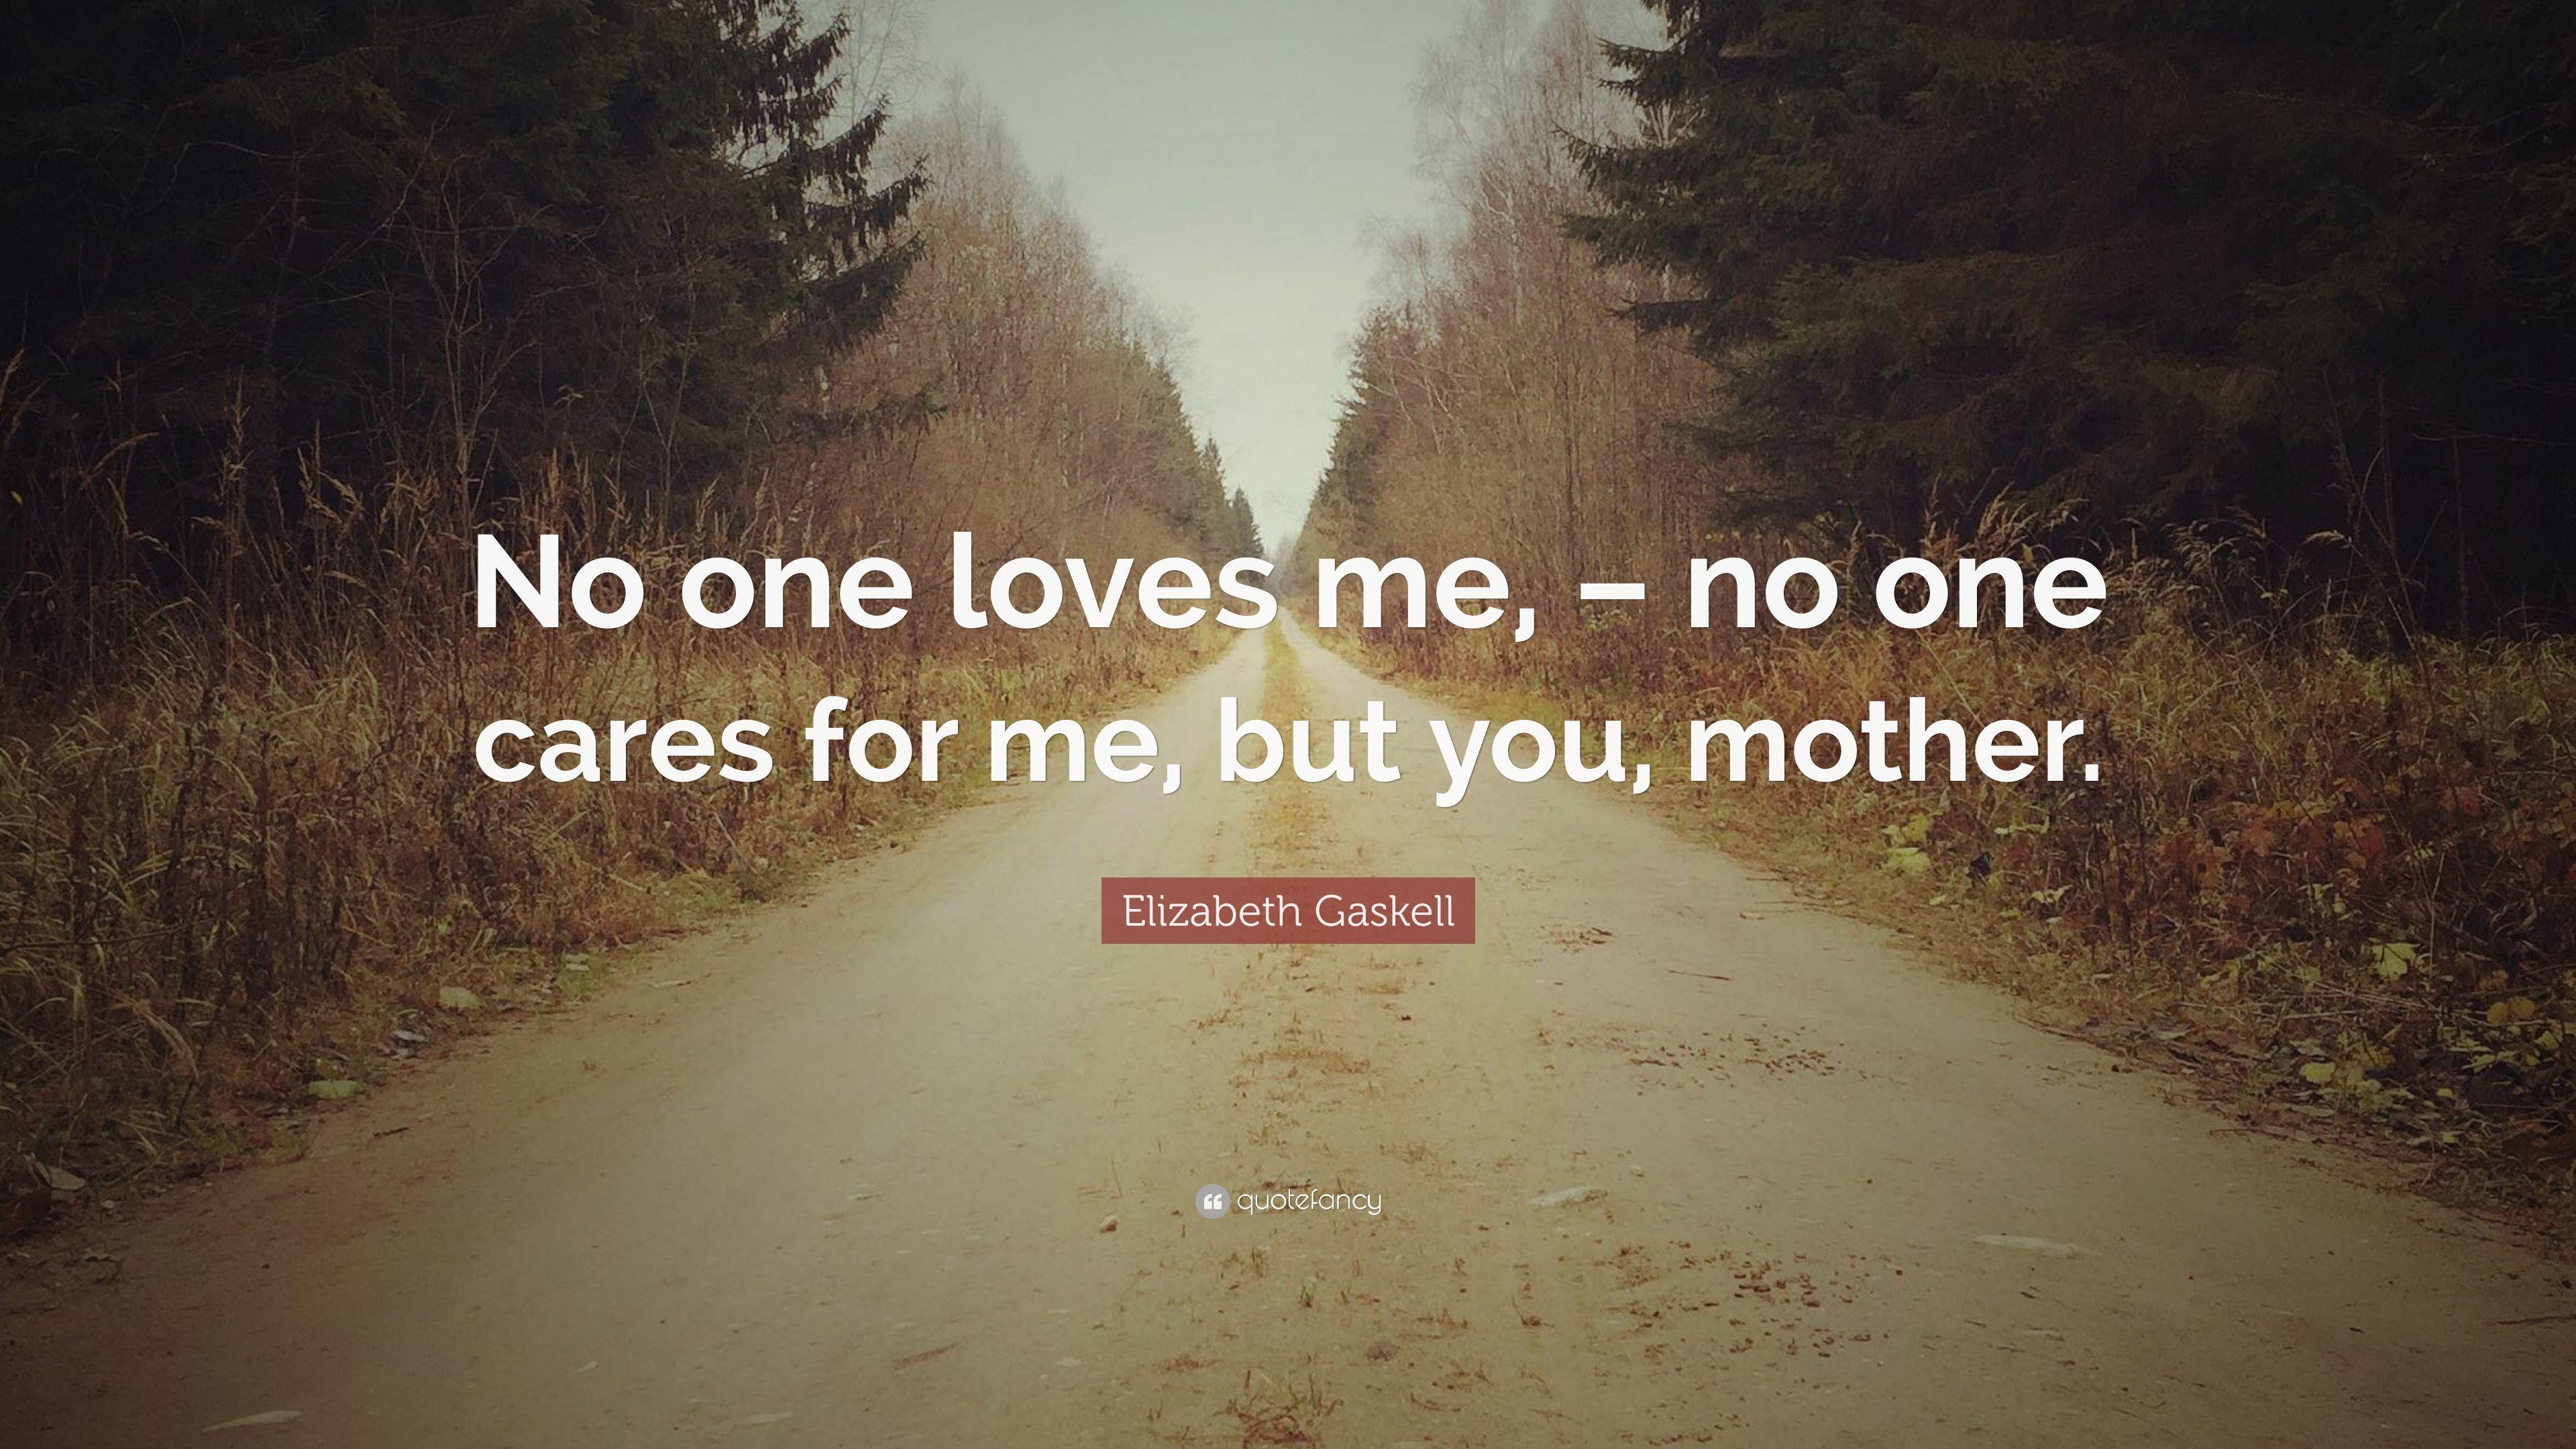 Elizabeth Gaskell Quote: “No one loves me